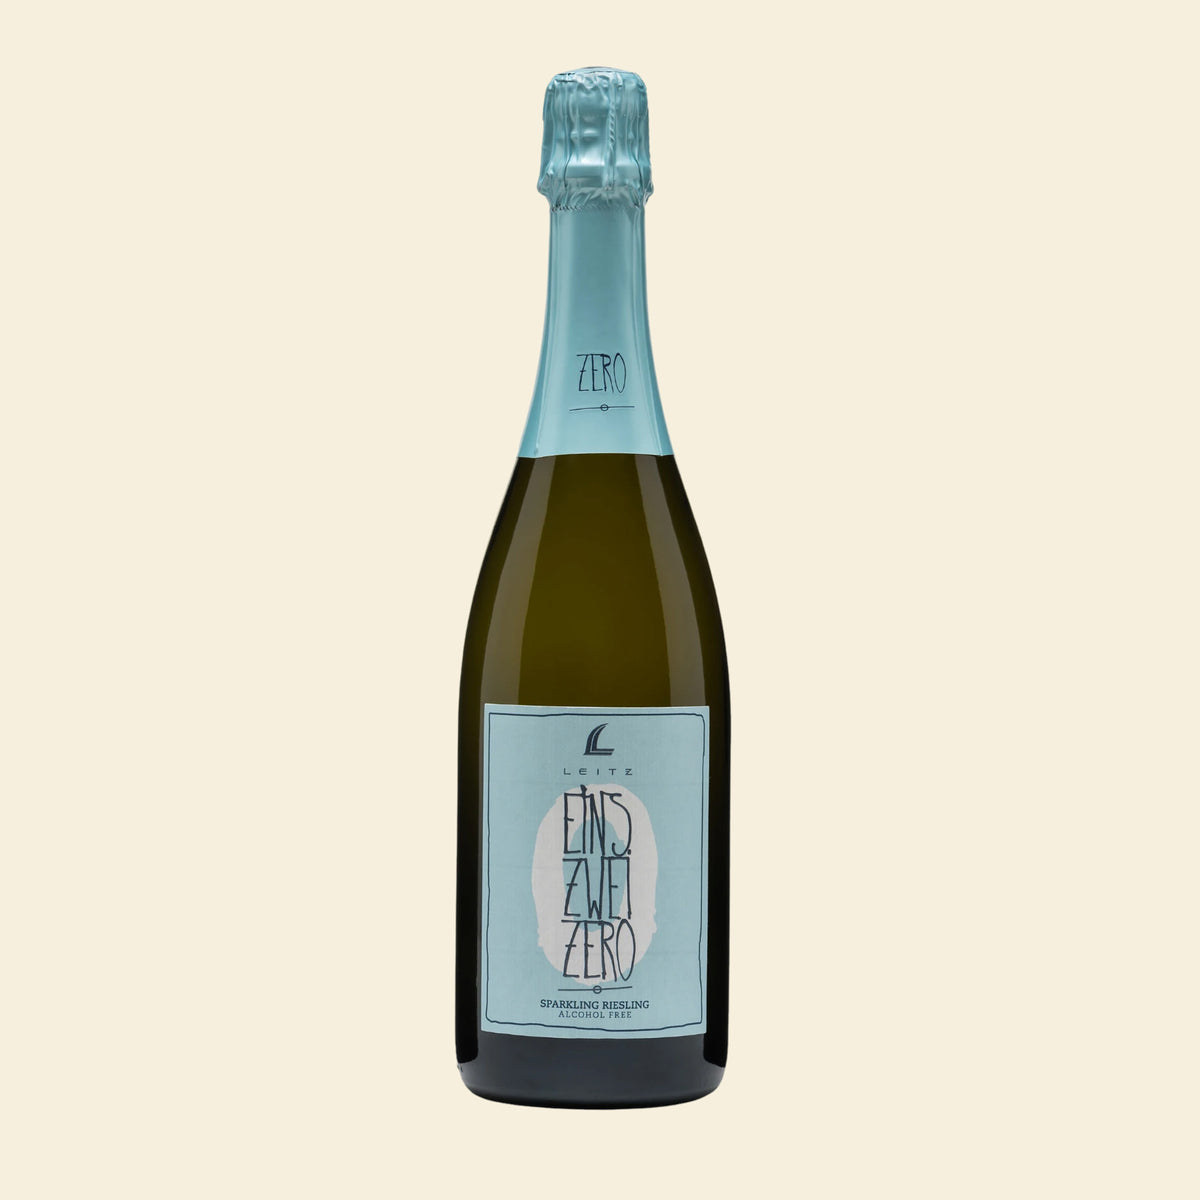 Leitz - Sparkling Riesling